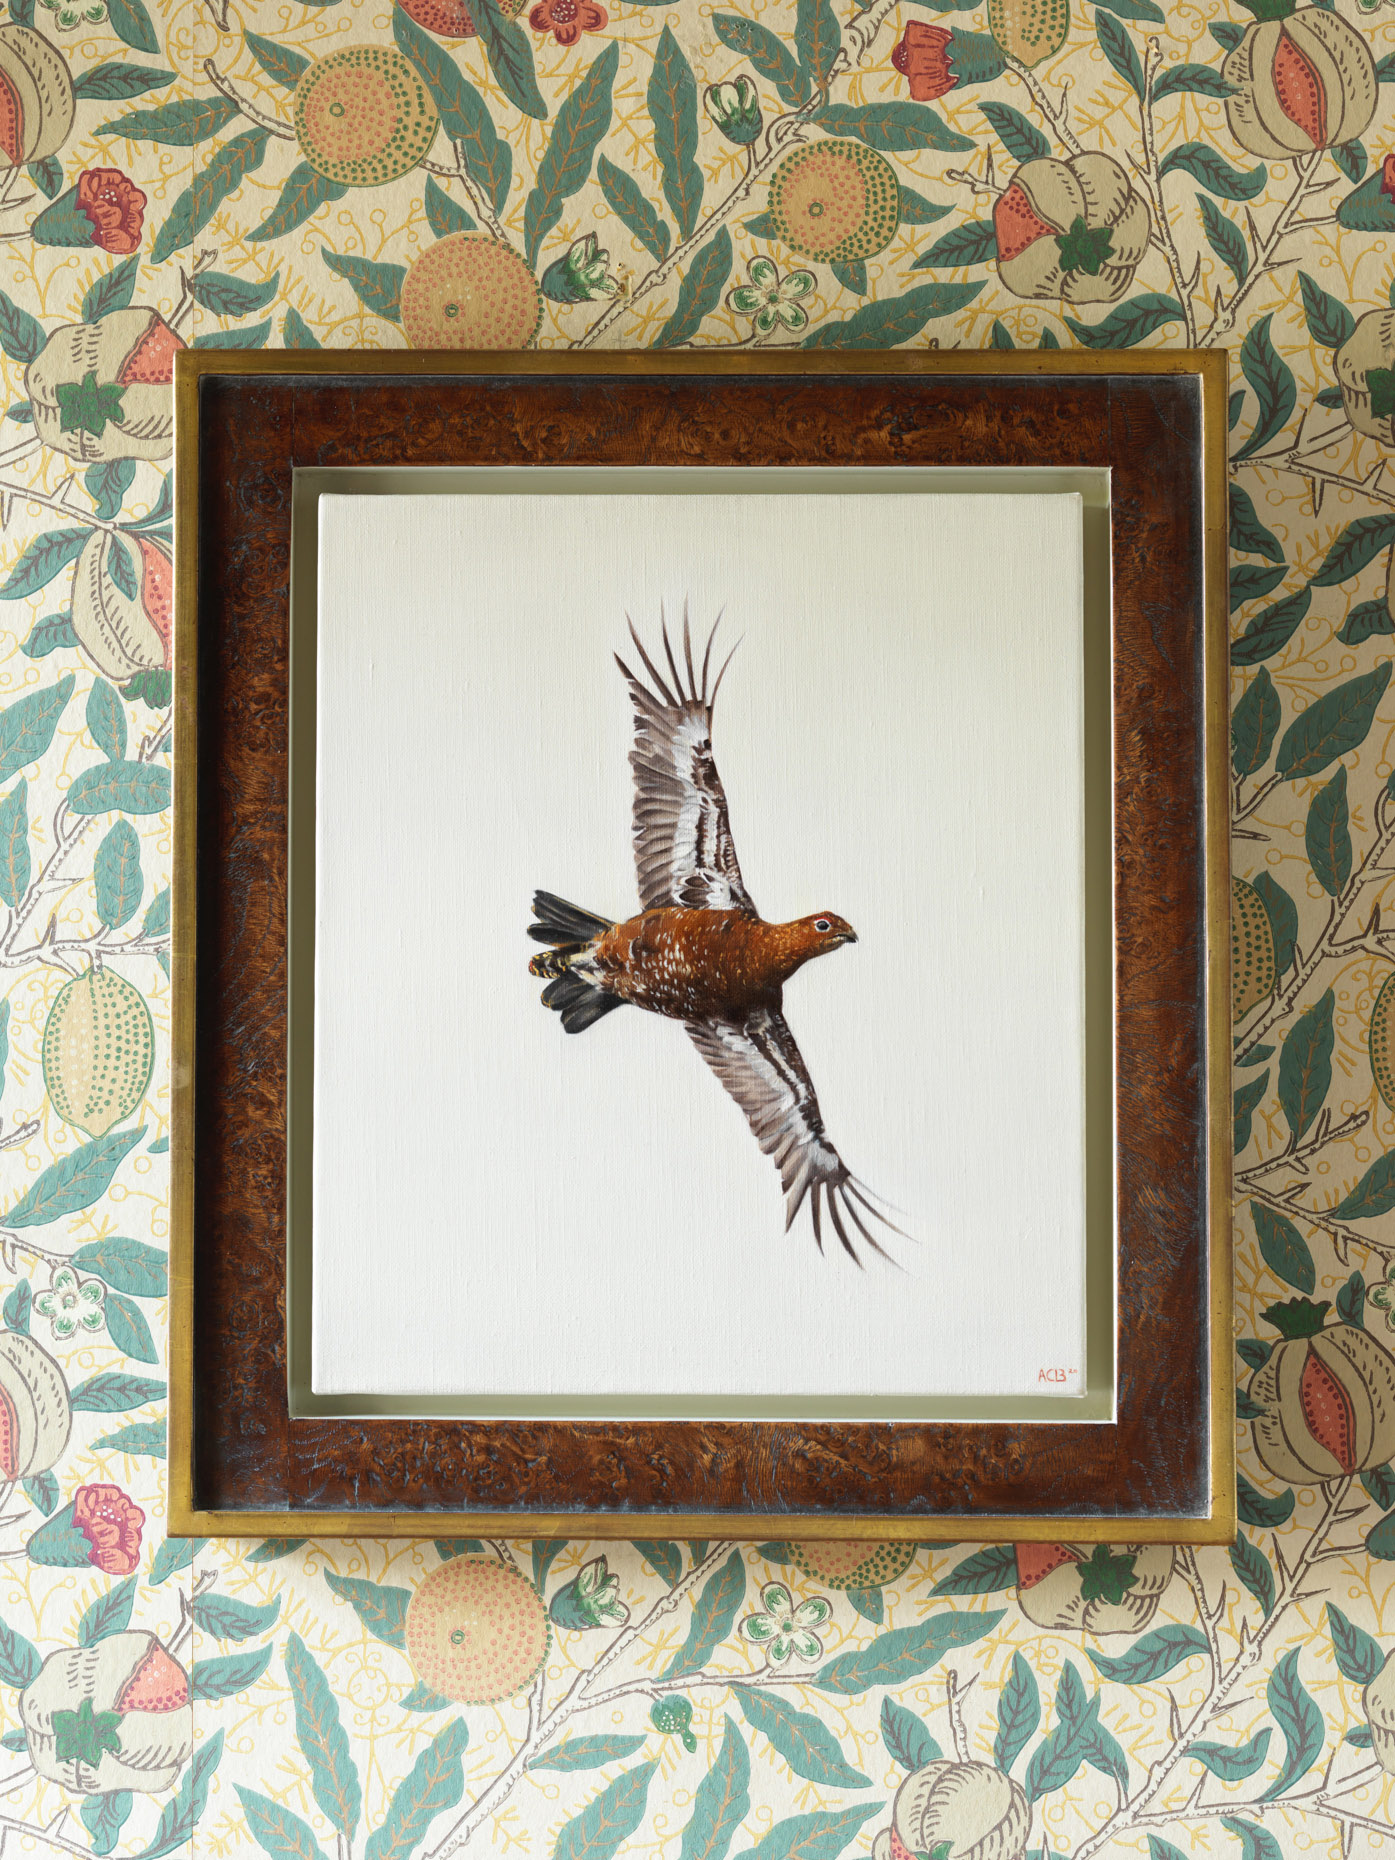 grouse bird flying by anna clare lees-buckley